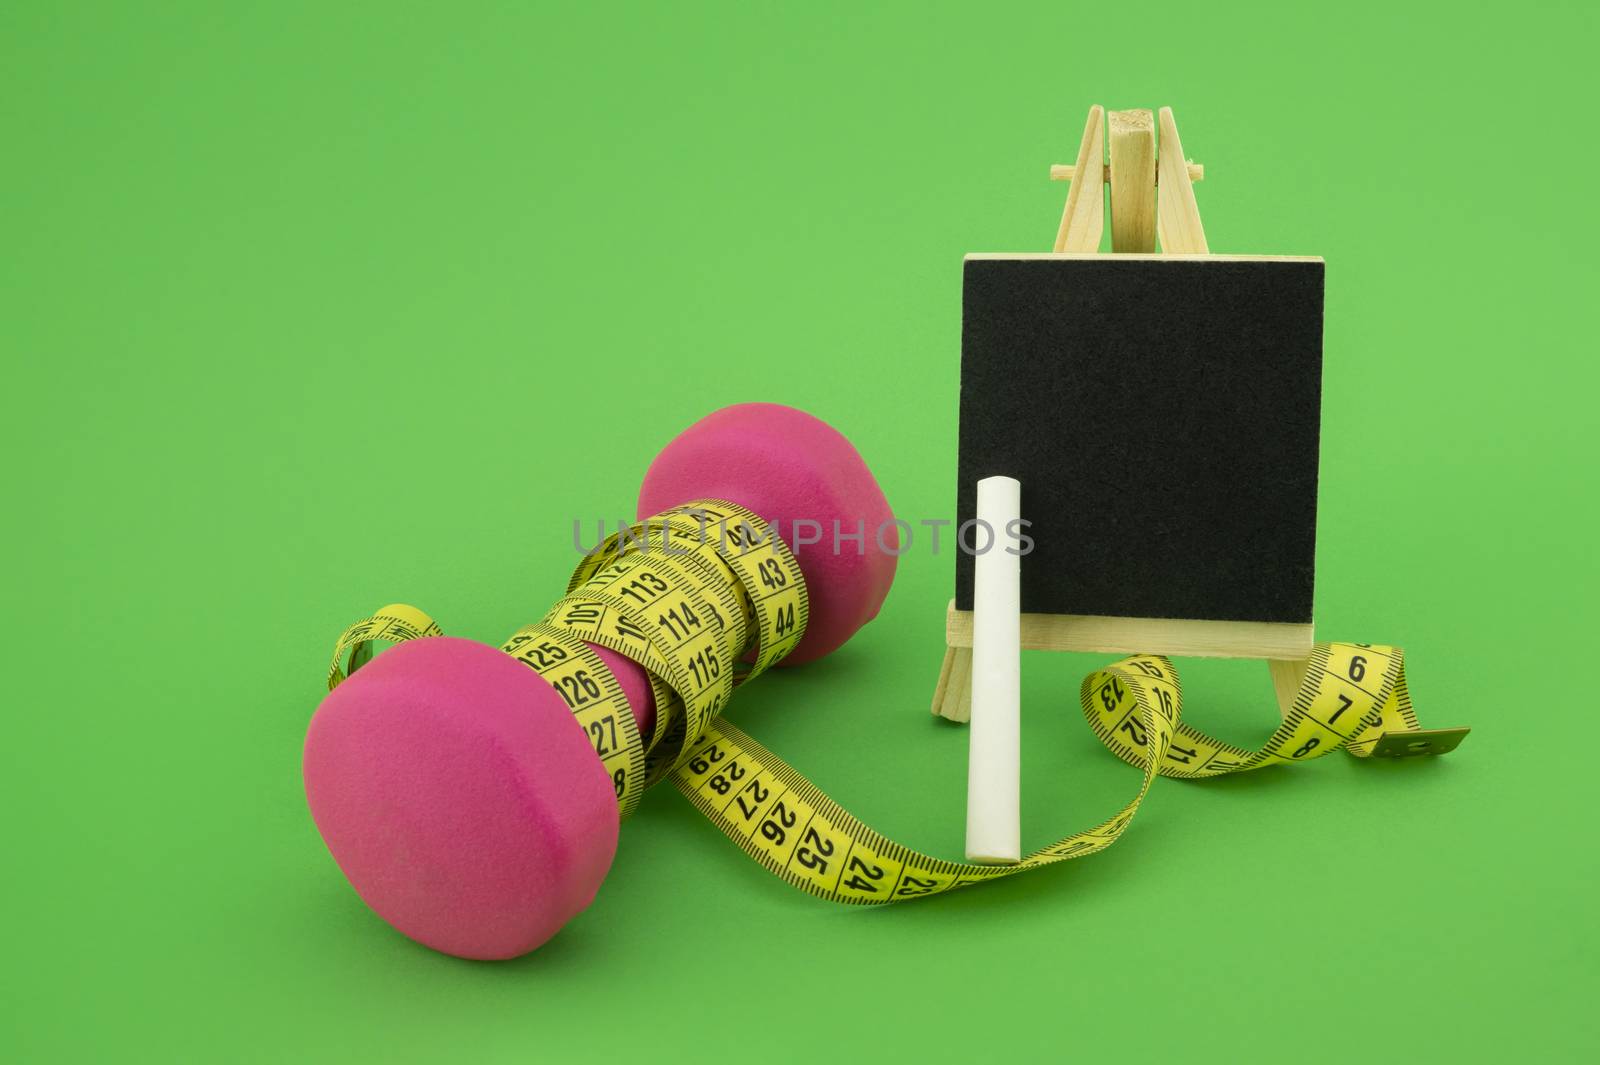 Starting healthy lifestyle concept. Still life with pink dumbbell, measuring tape, chalkboard and chalk on green background